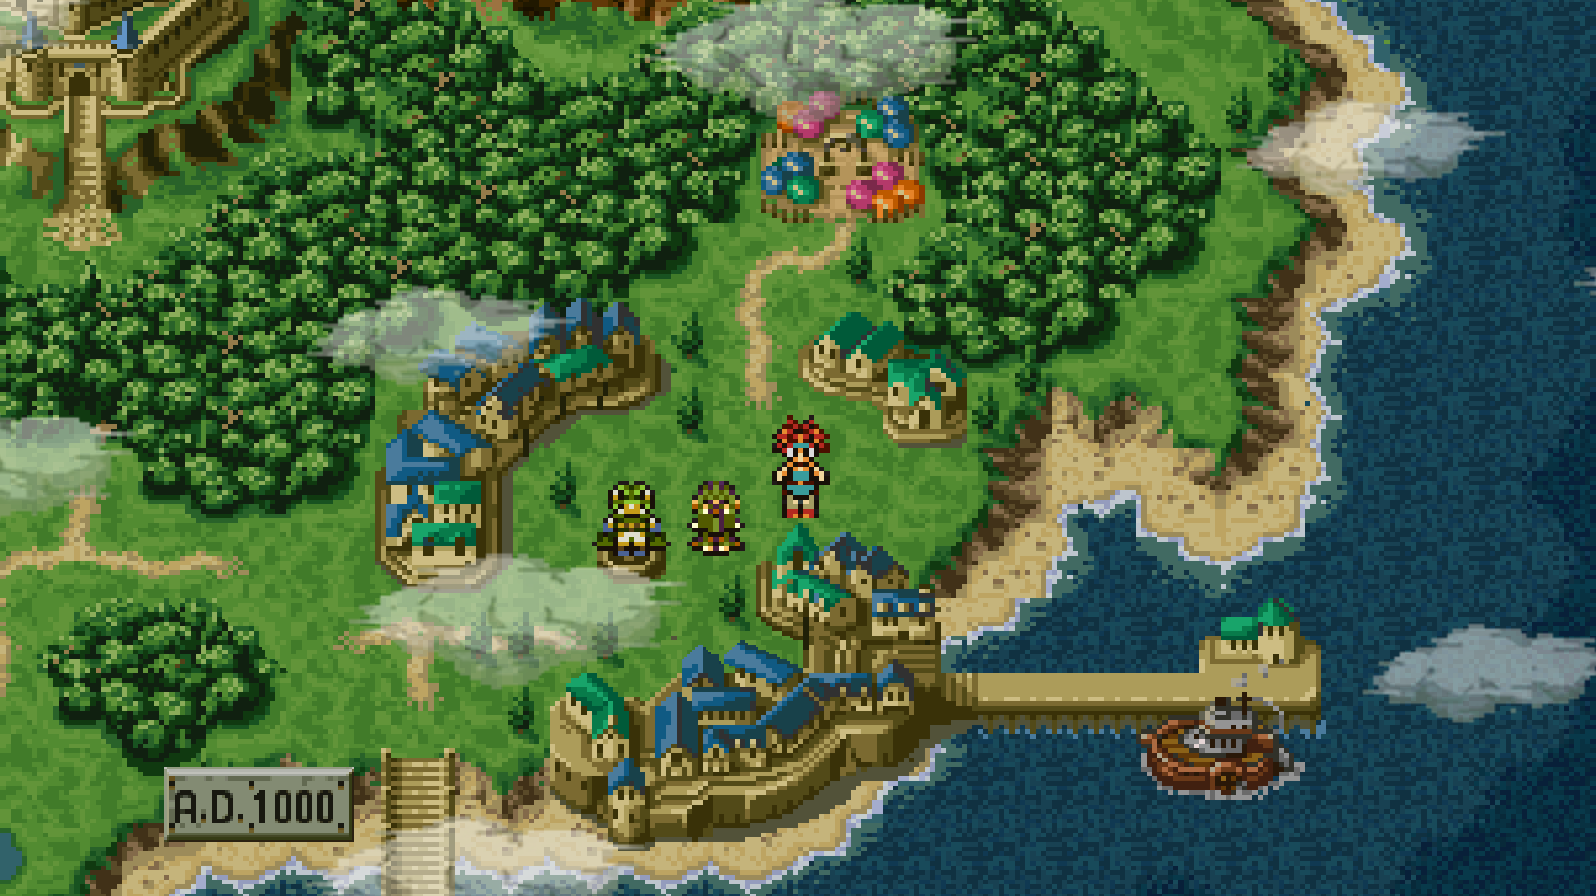 The SNES classic Chrono Trigger hits lowest price in years on iOS at $5  (Reg. $10)